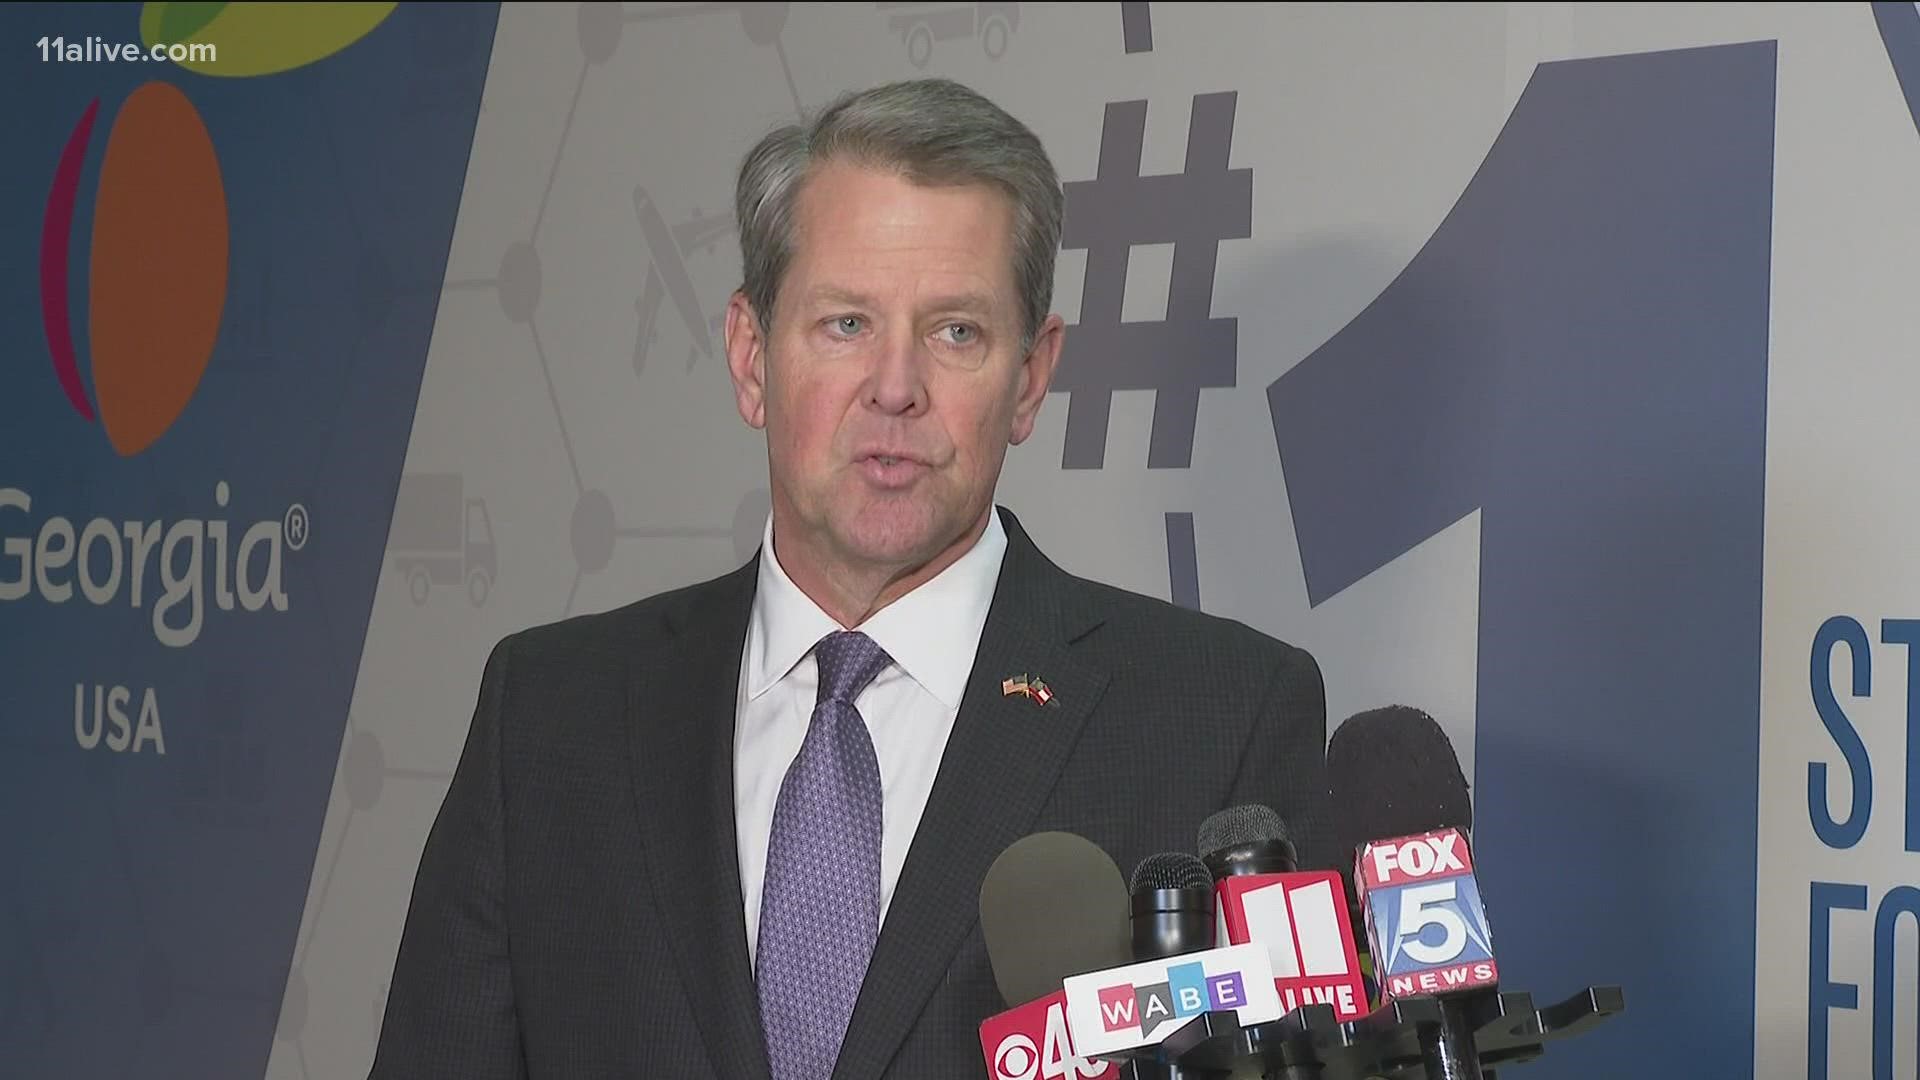 Here is the latest on Governor Kemp's efforts to combat the COVID-19 virus.